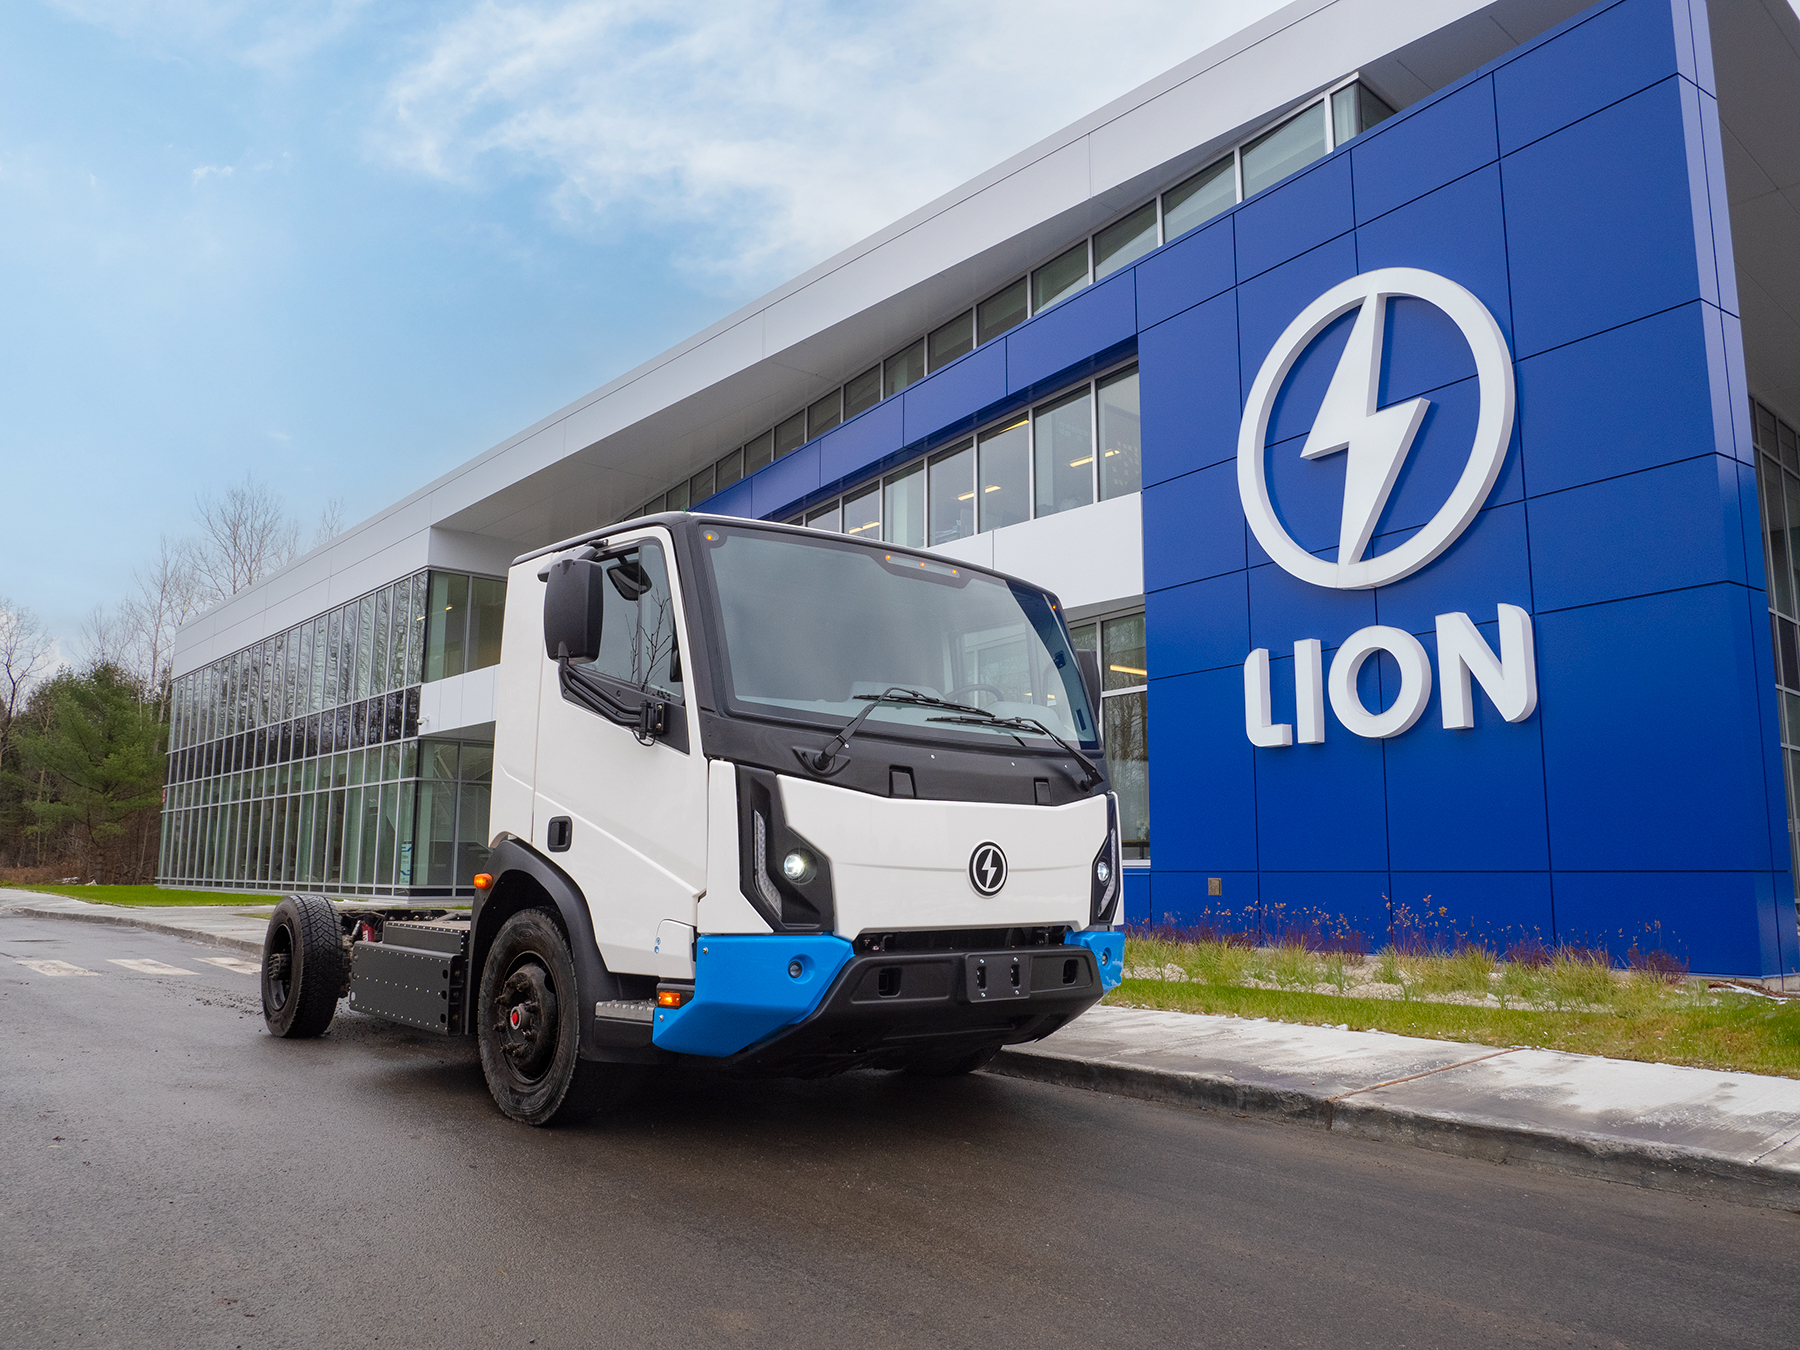 lion5 all electric medium duty commercial truck hero image